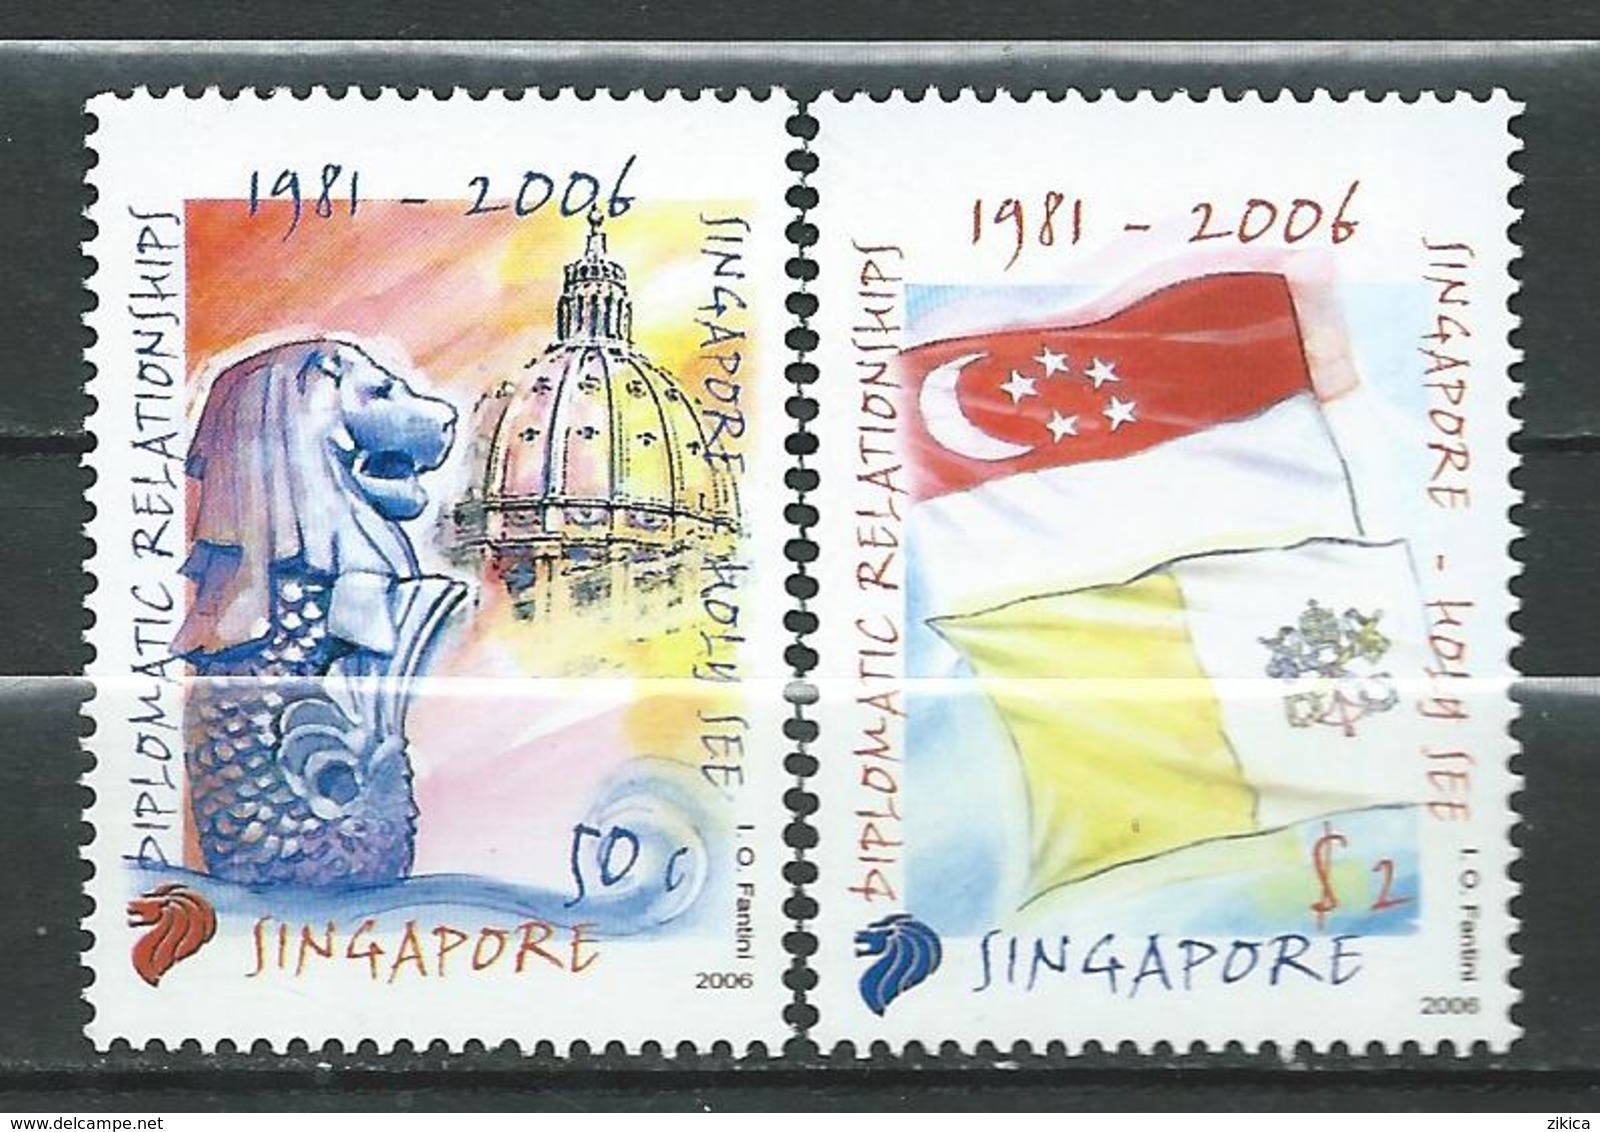 Singapore 2006 The 25th Anniversary Of Diplomatic Relations With The Holy See - Joint Issue. MNH - Singapur (1959-...)